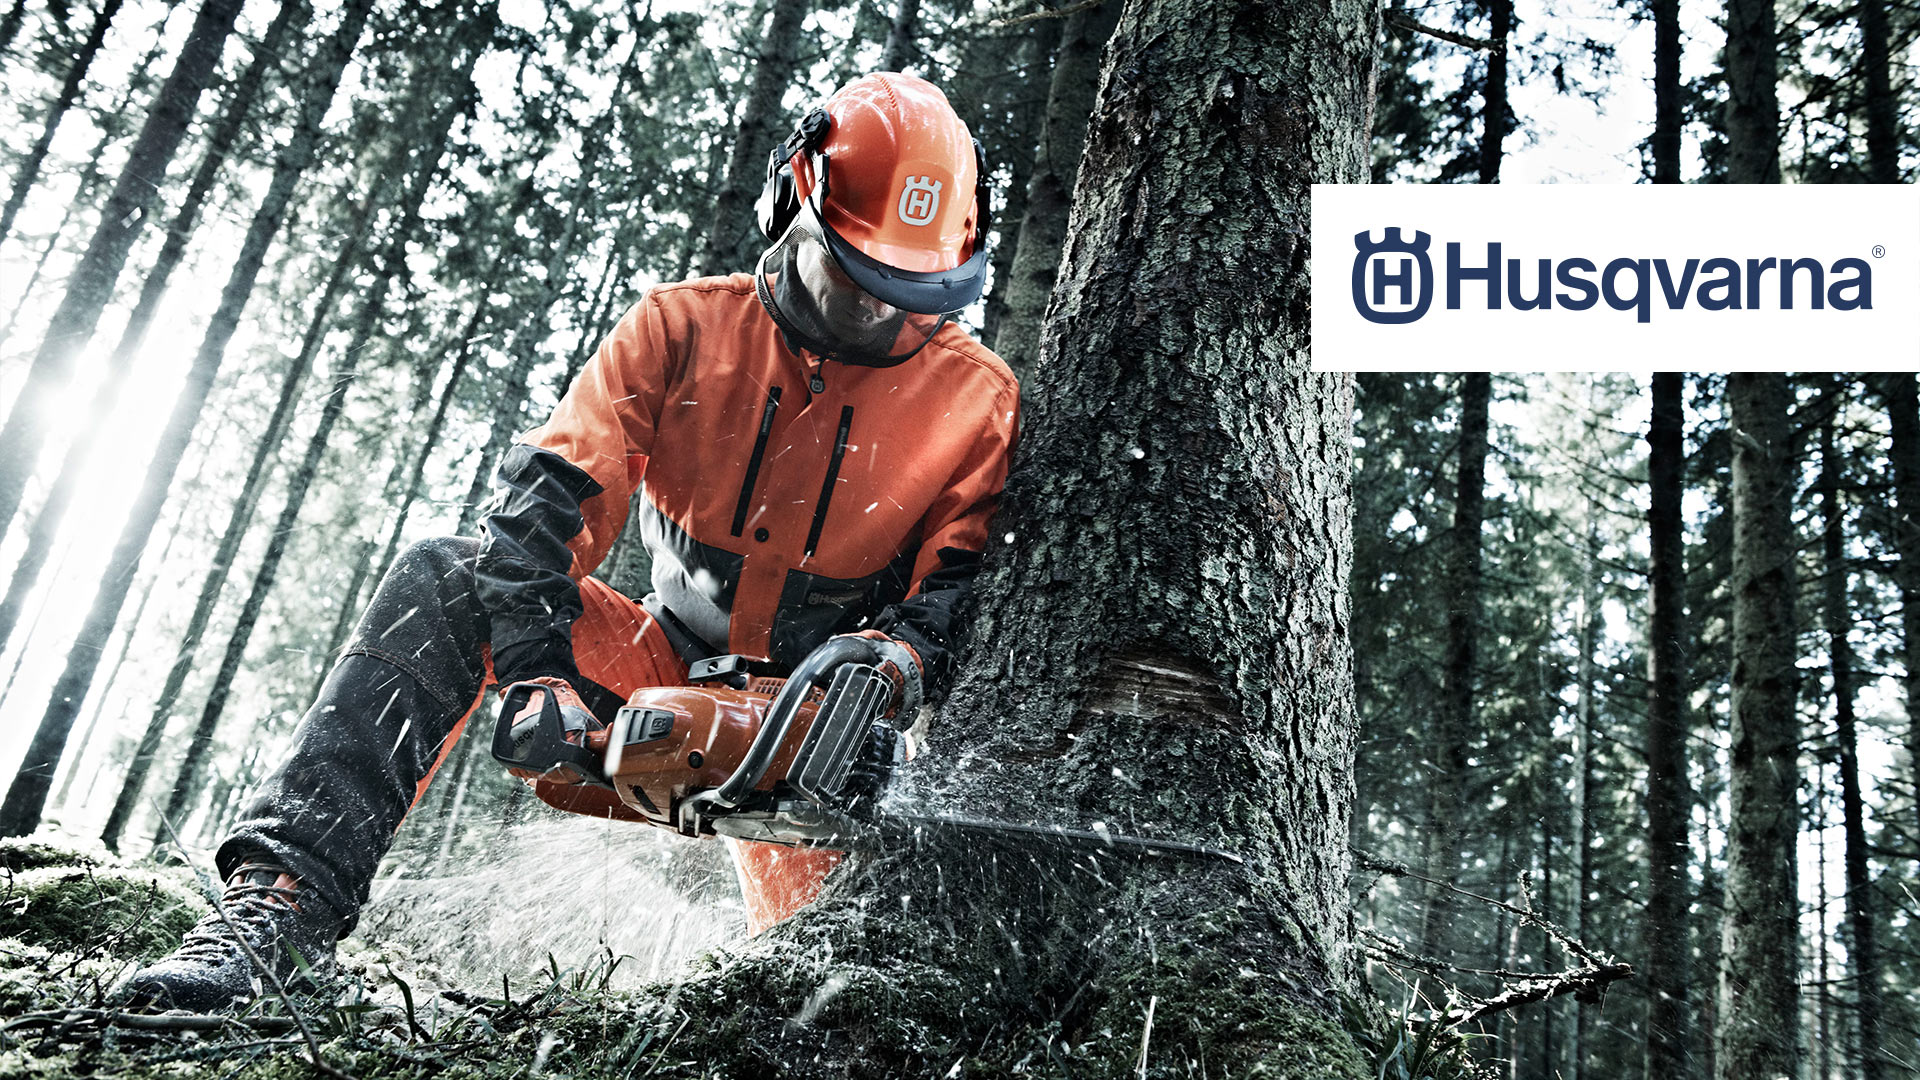 husqvarna-fall-chainsaw-and-snow-promotion-calendars-media-group-online